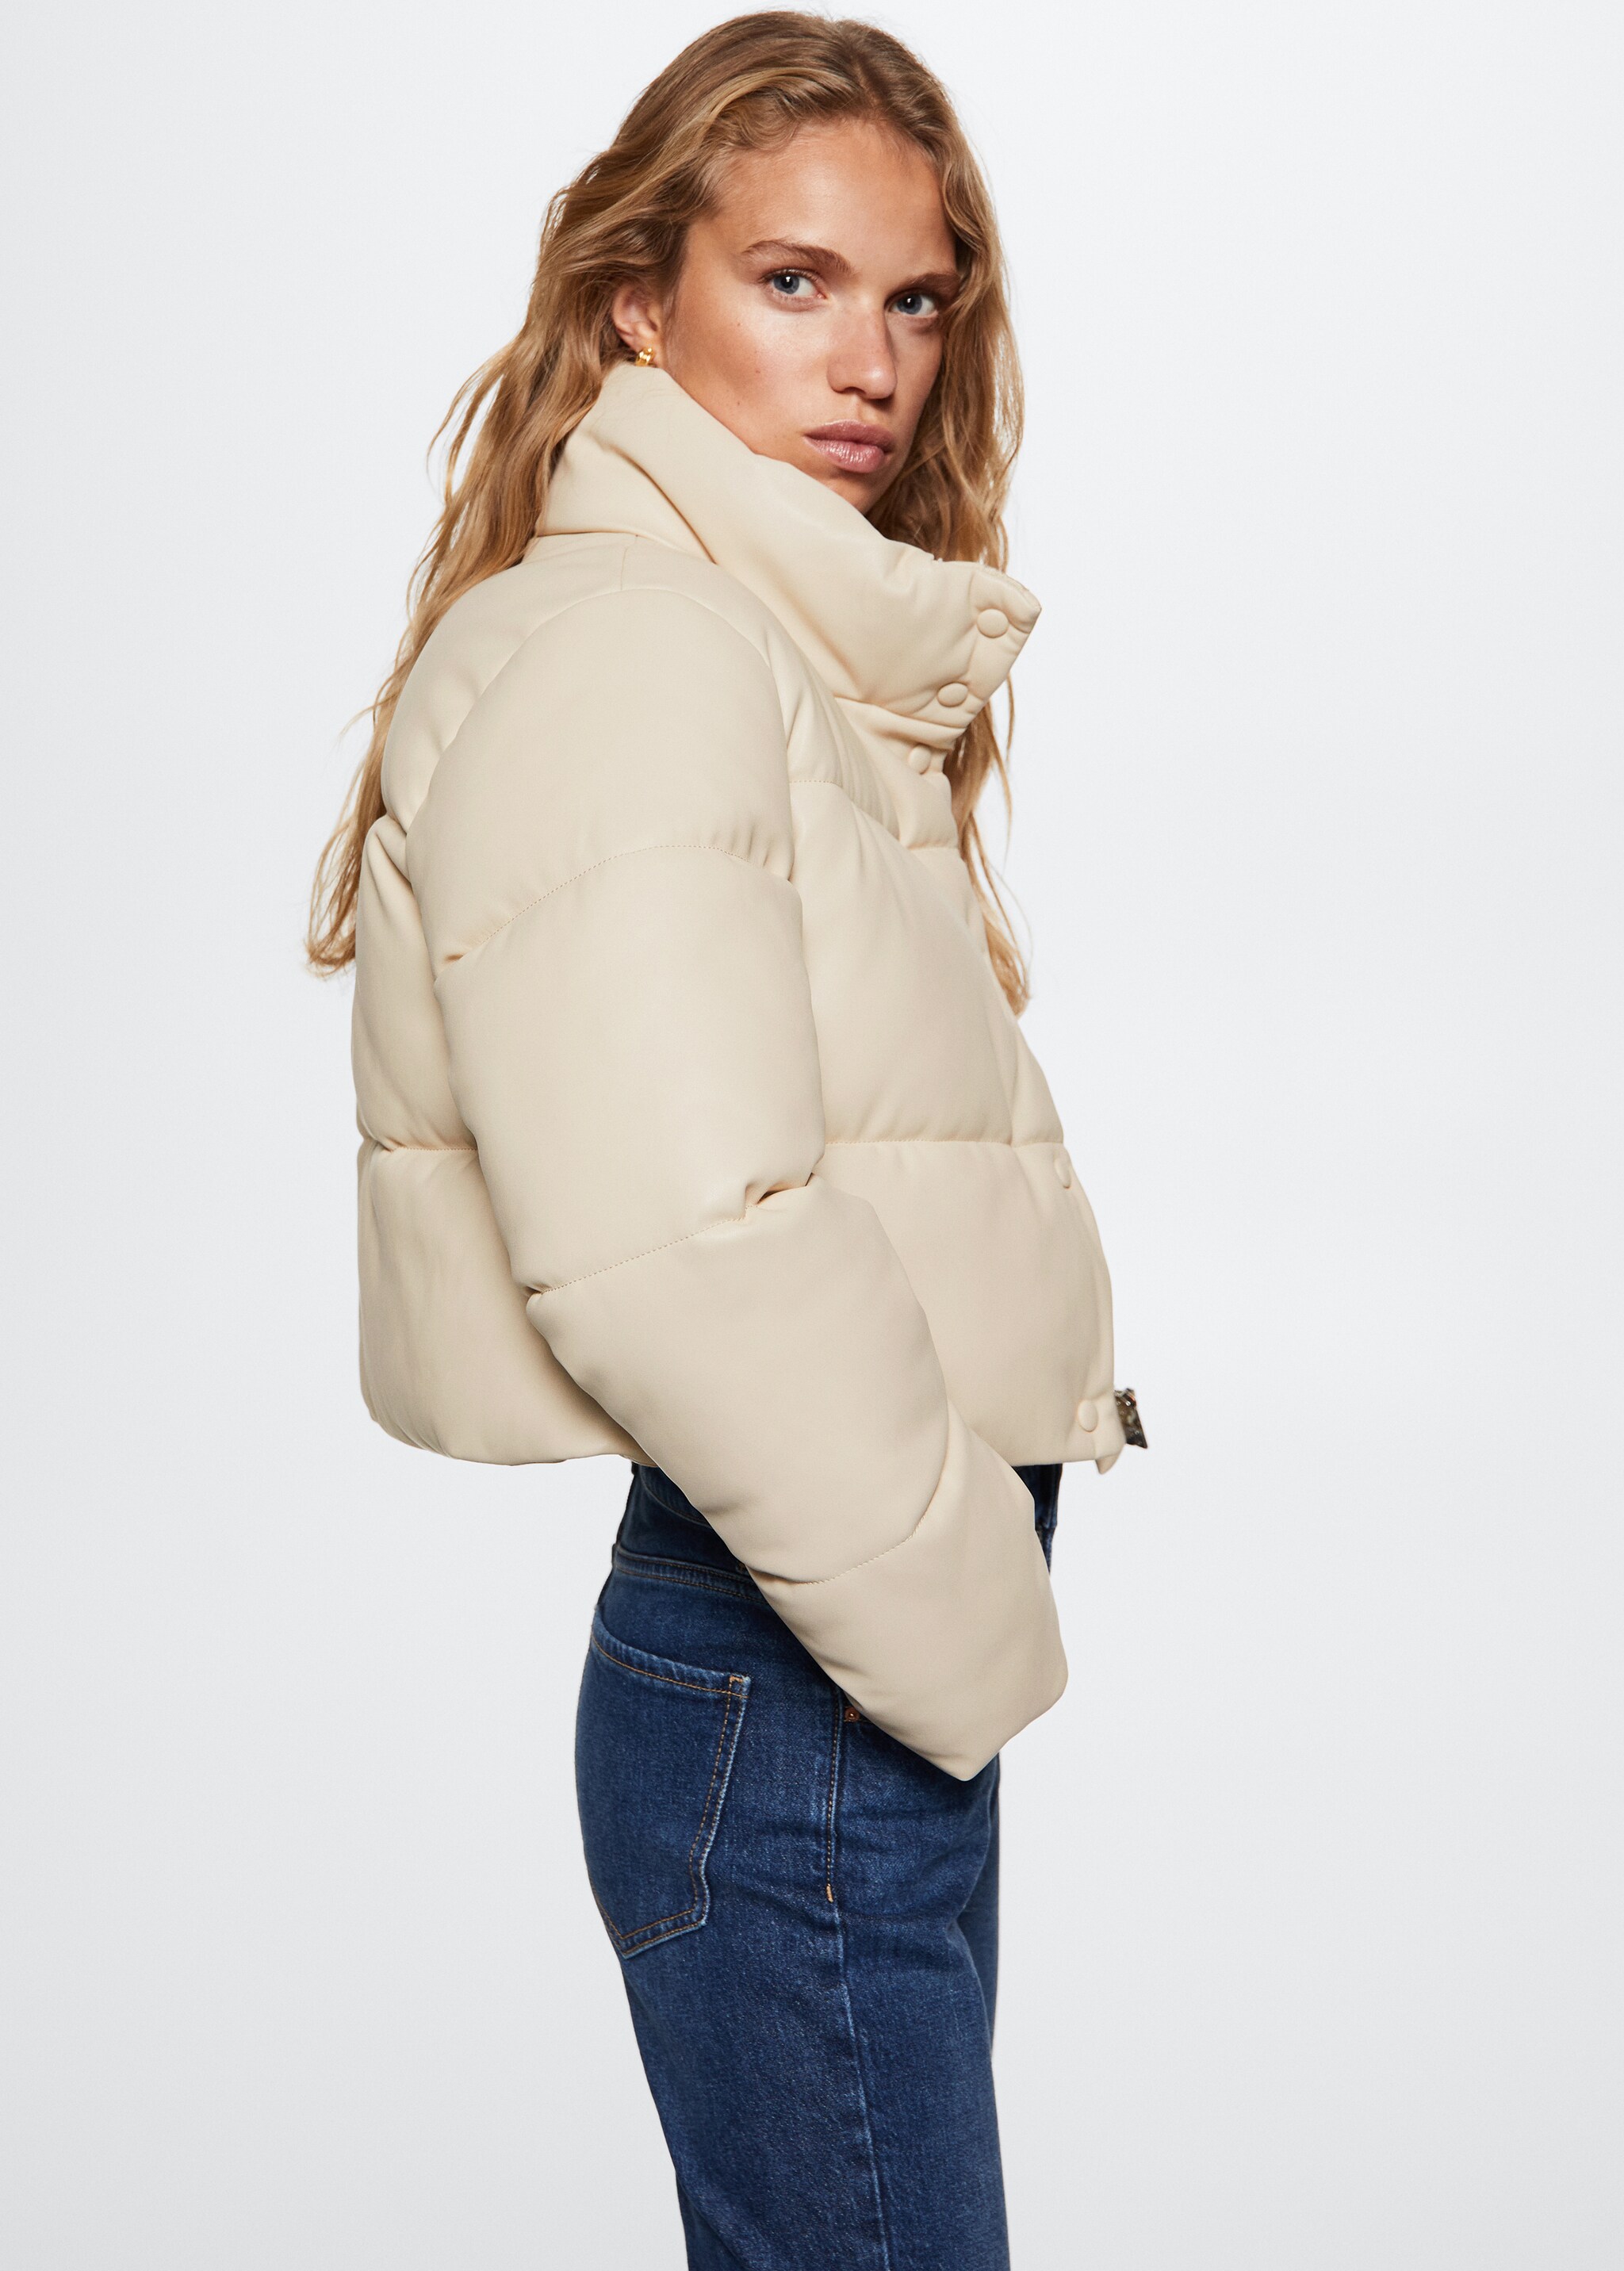 Quilted skin style jacket - Details of the article 4